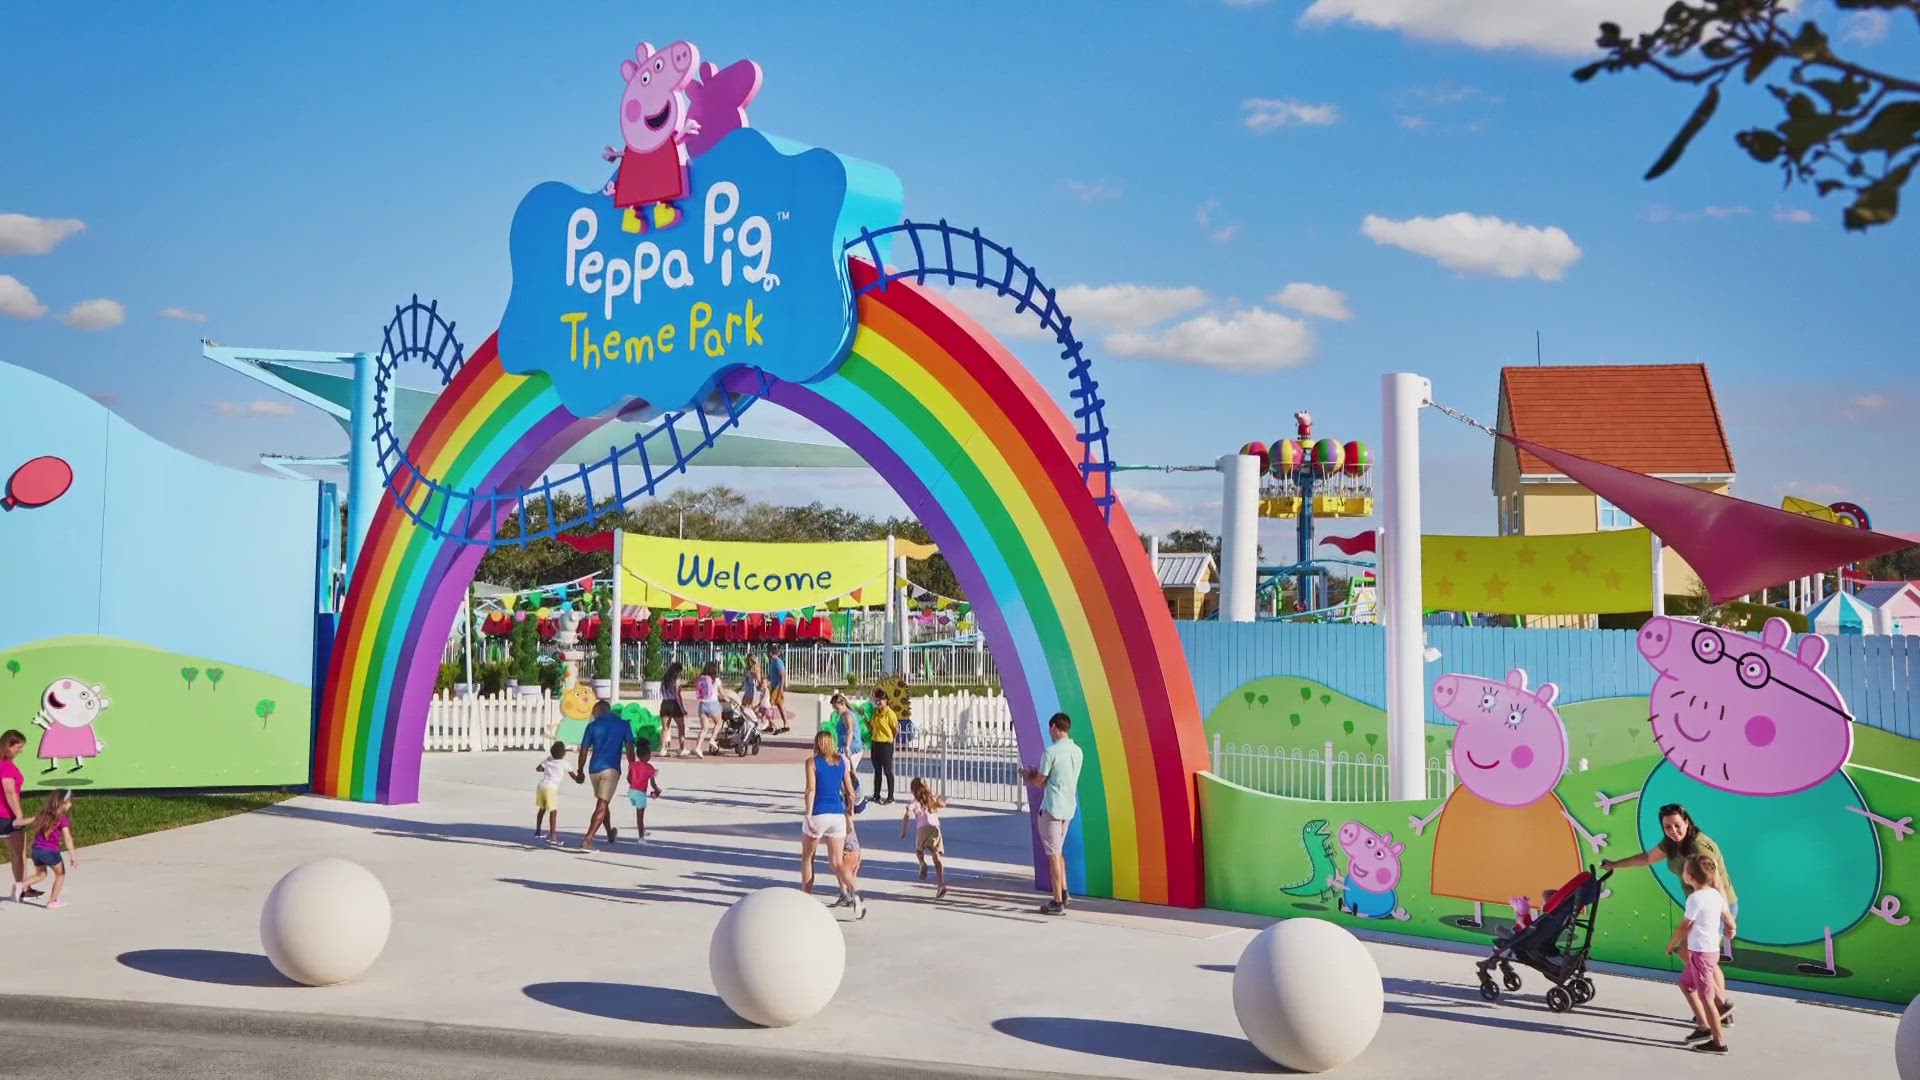 A Peppa Pig Theme Park is being planned for North Richland Hills, off Boulevard 26 next door to the NRH2O Family Water Park